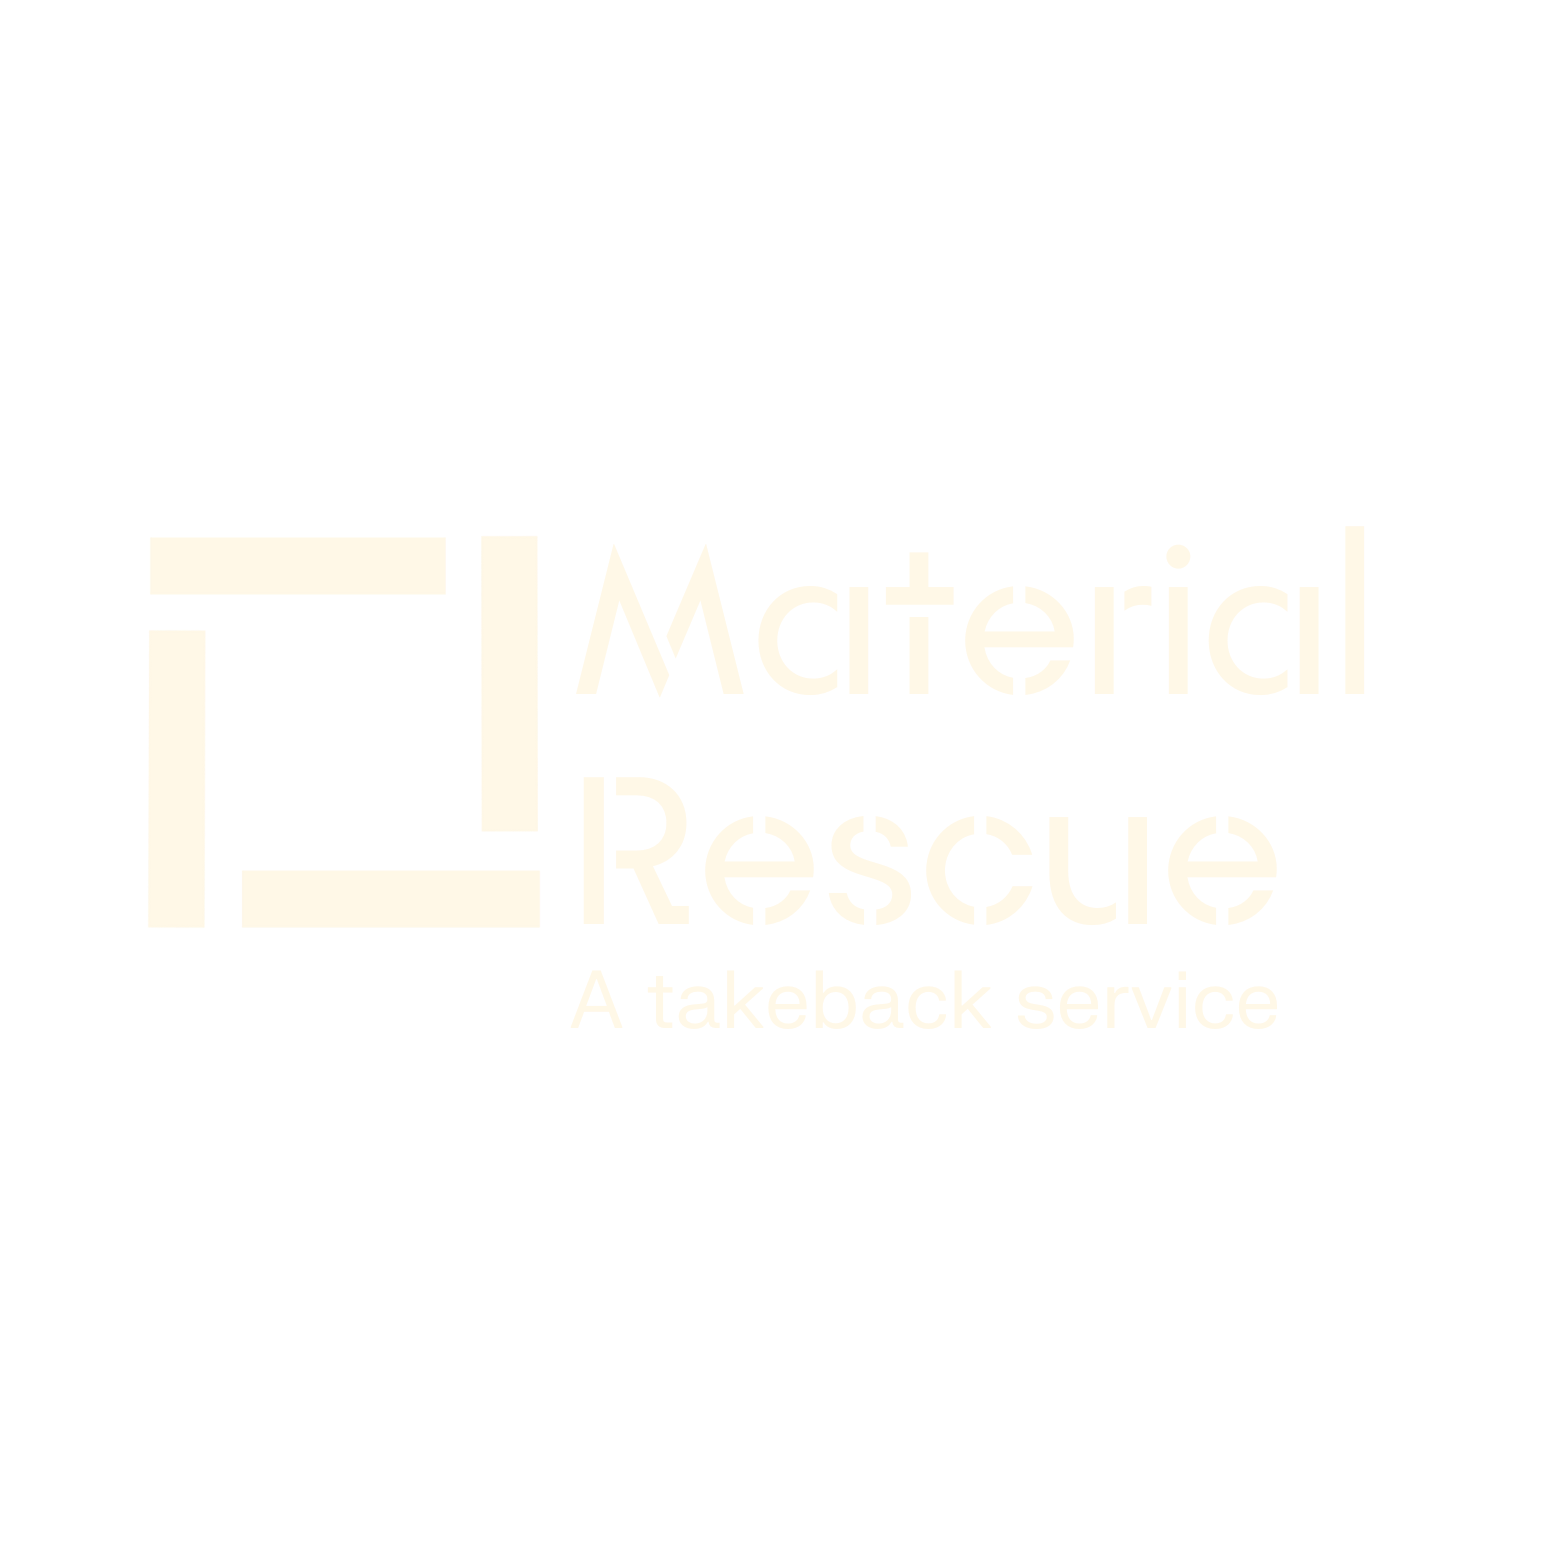 Material Rescue logo - a takeback service from Surface Matter